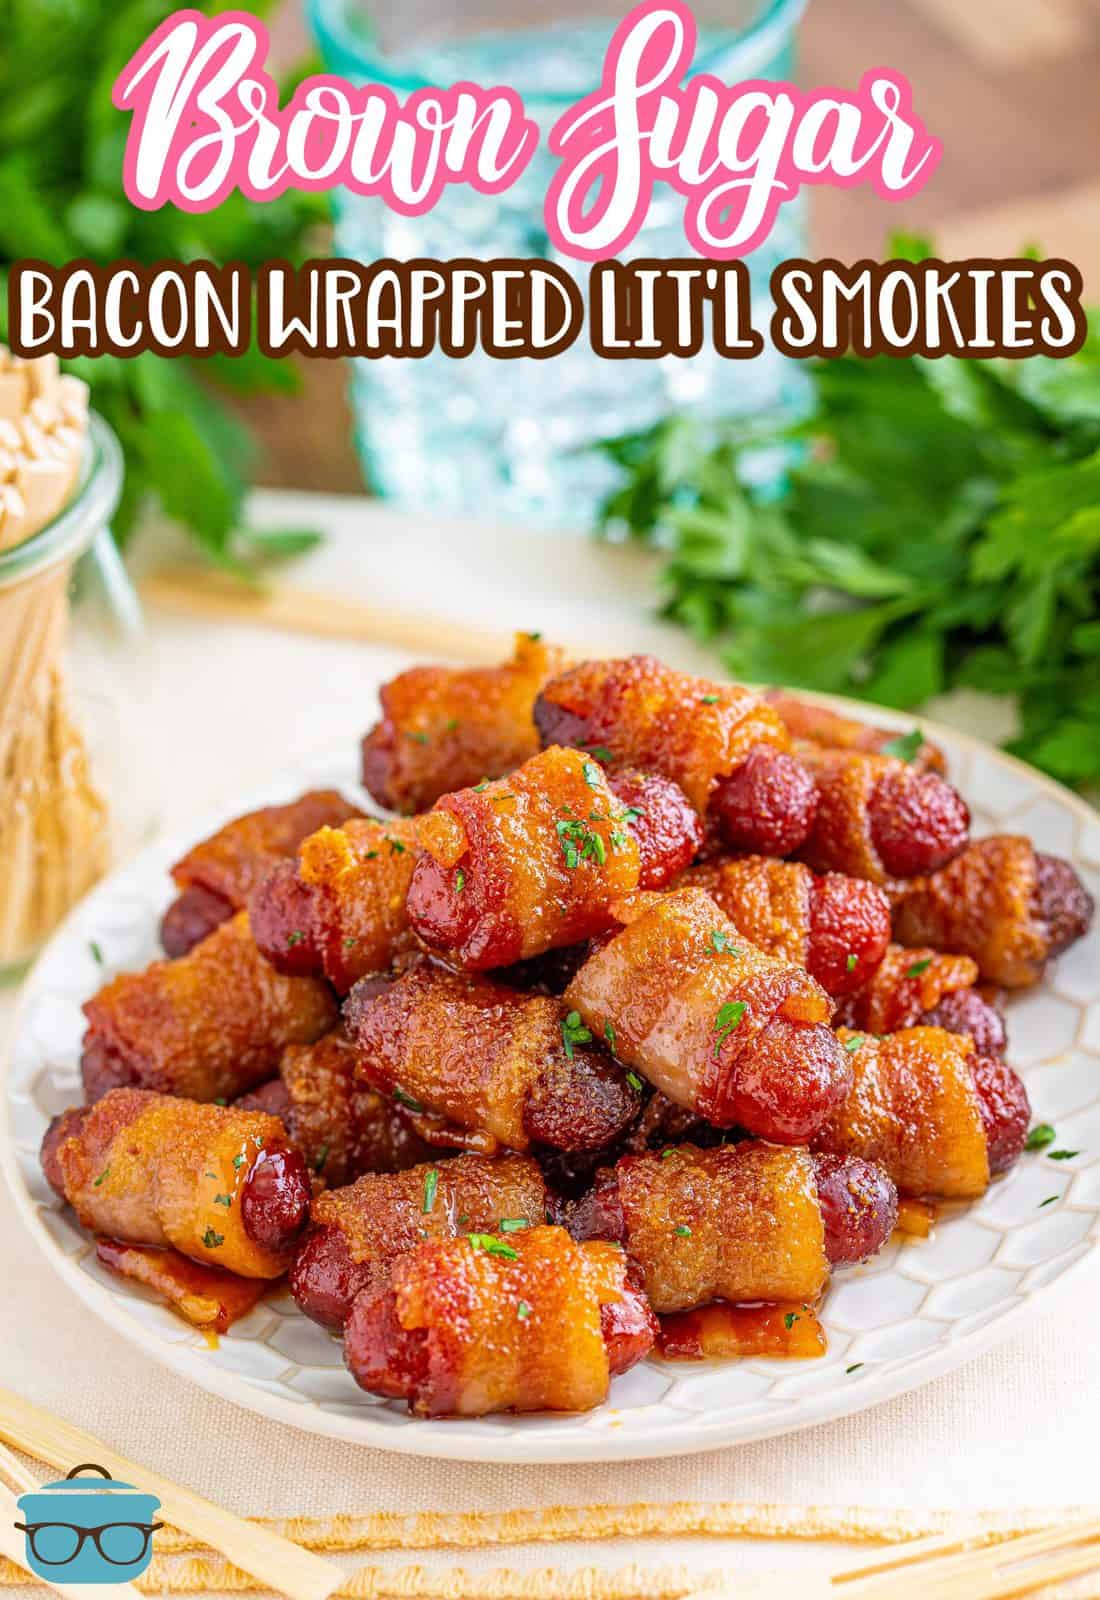 Pinterest image of Brown Sugar Bacon Wrapped Little Smokies on white plate with parsley in background.